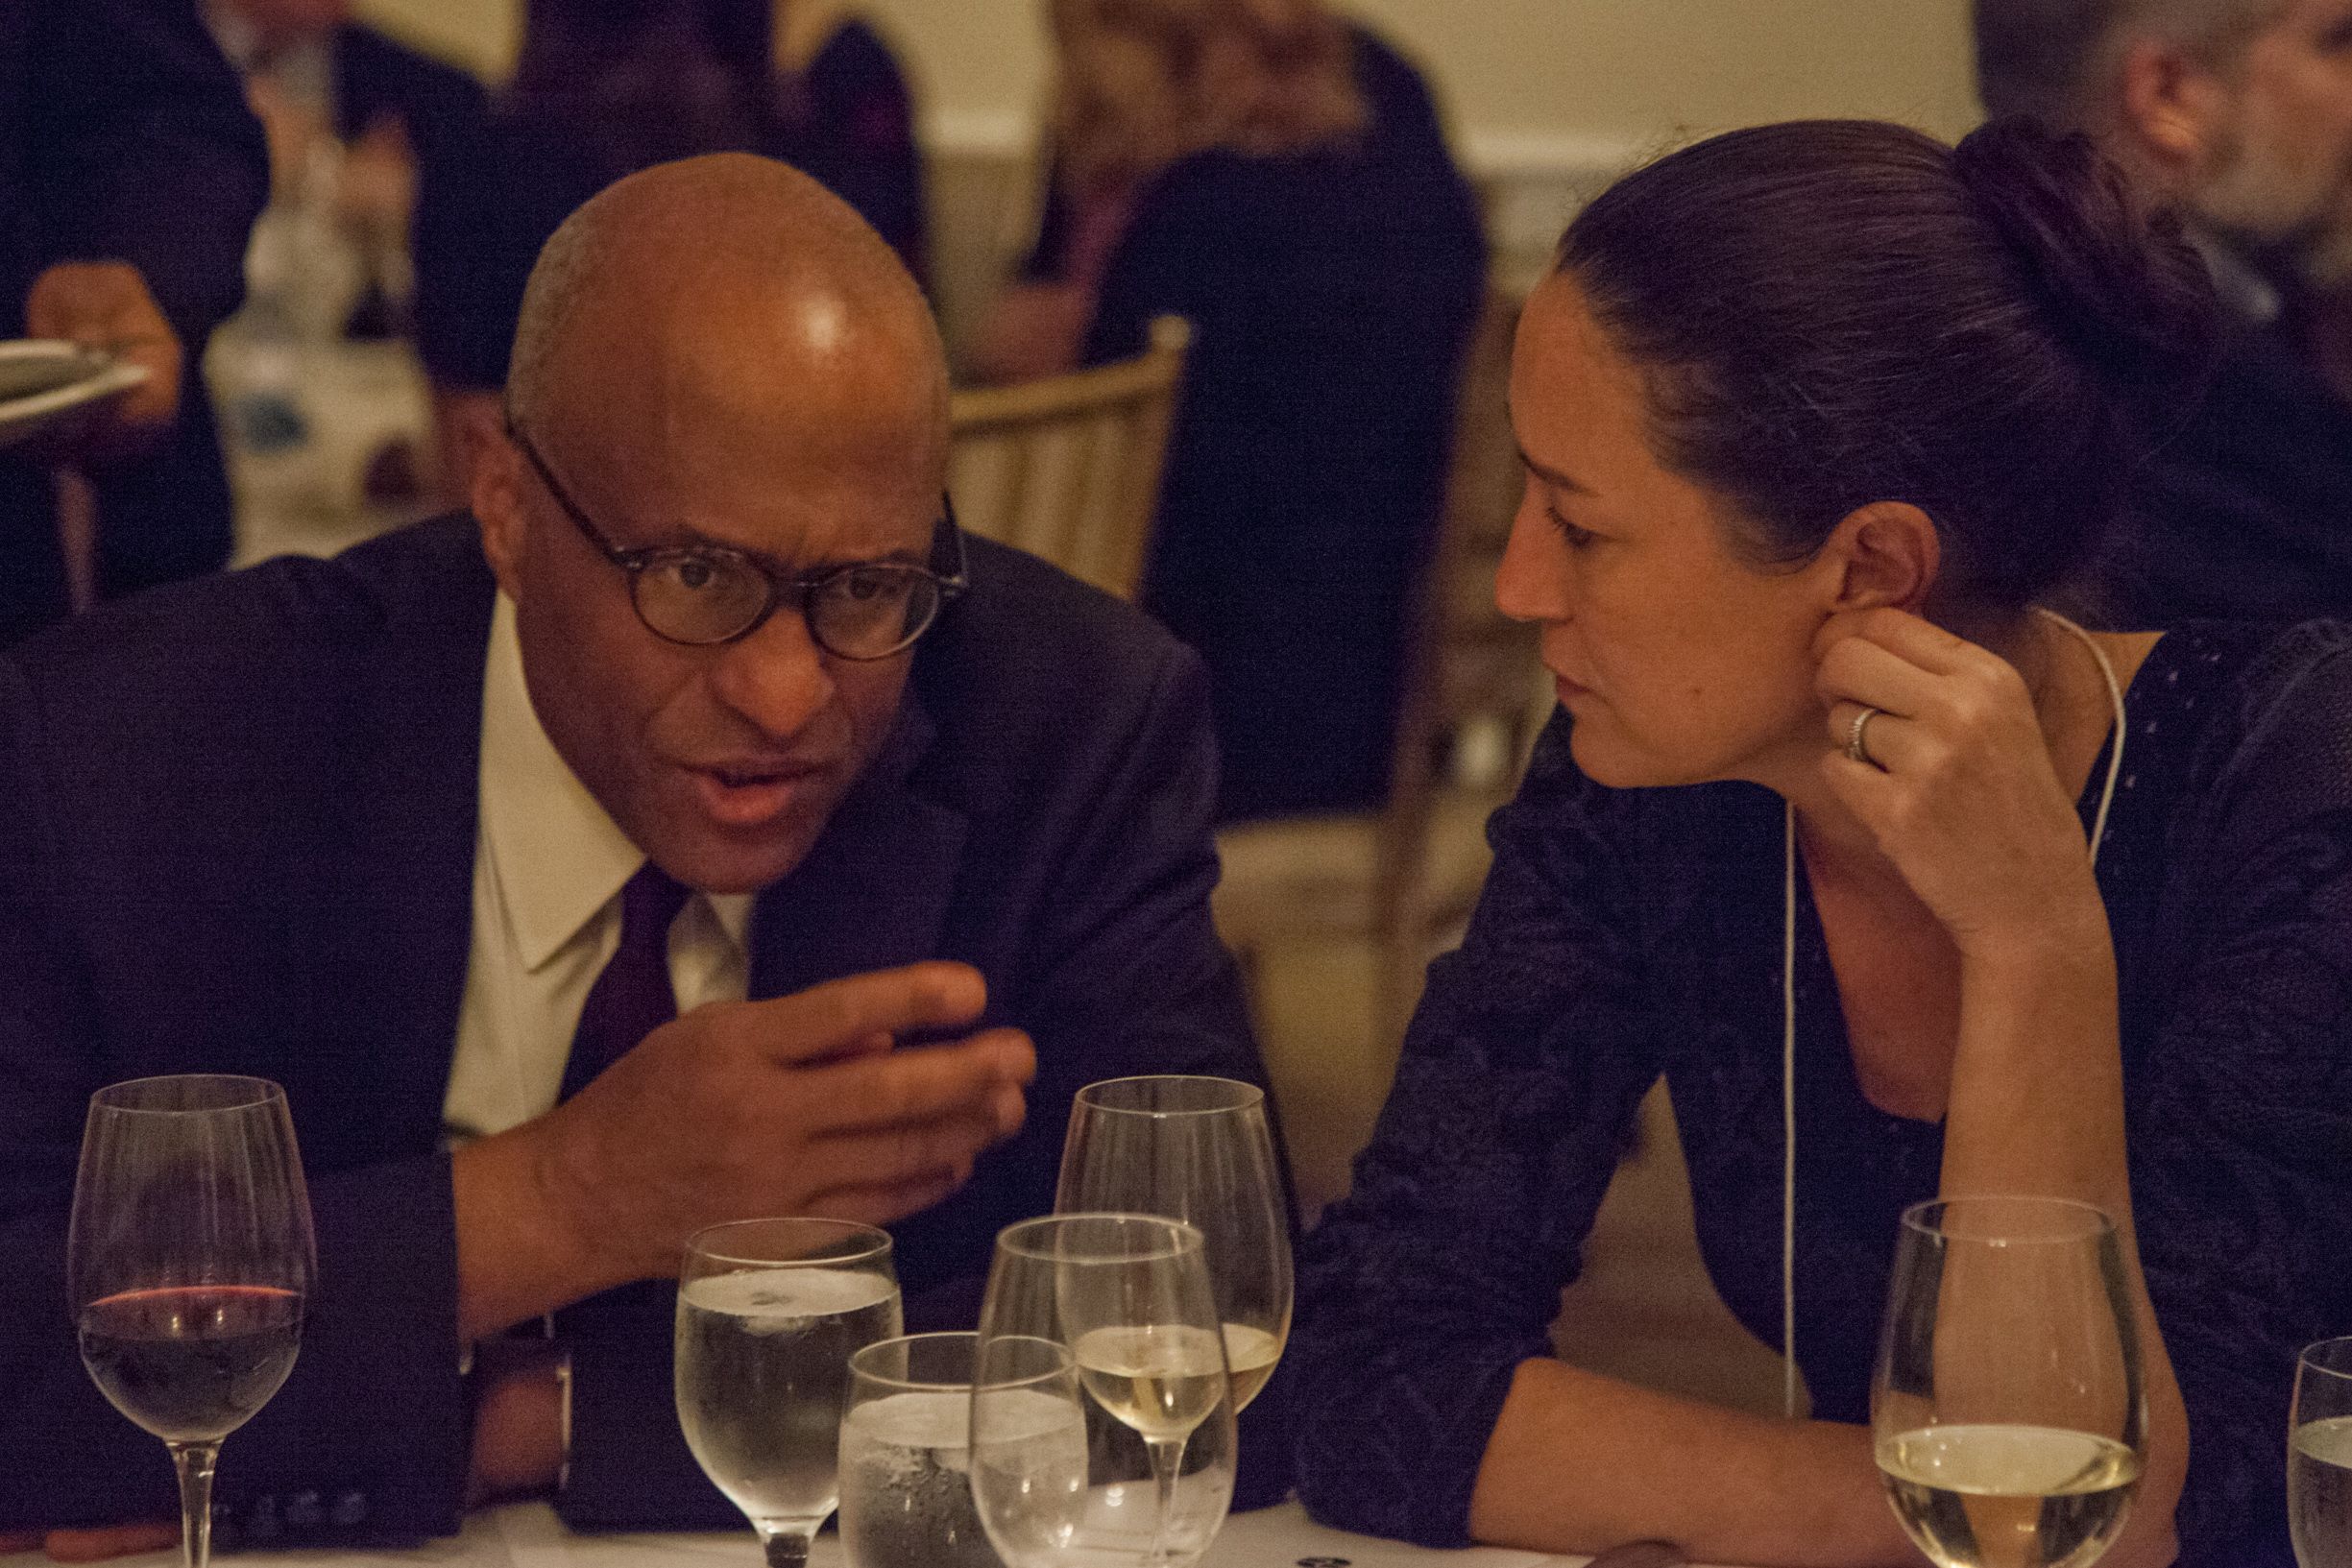 Joel Motley of the Board of Directors with Pulitzer Center Managing Director Nathalie Applewhite. Image by Jin Ding. United States, 2018.